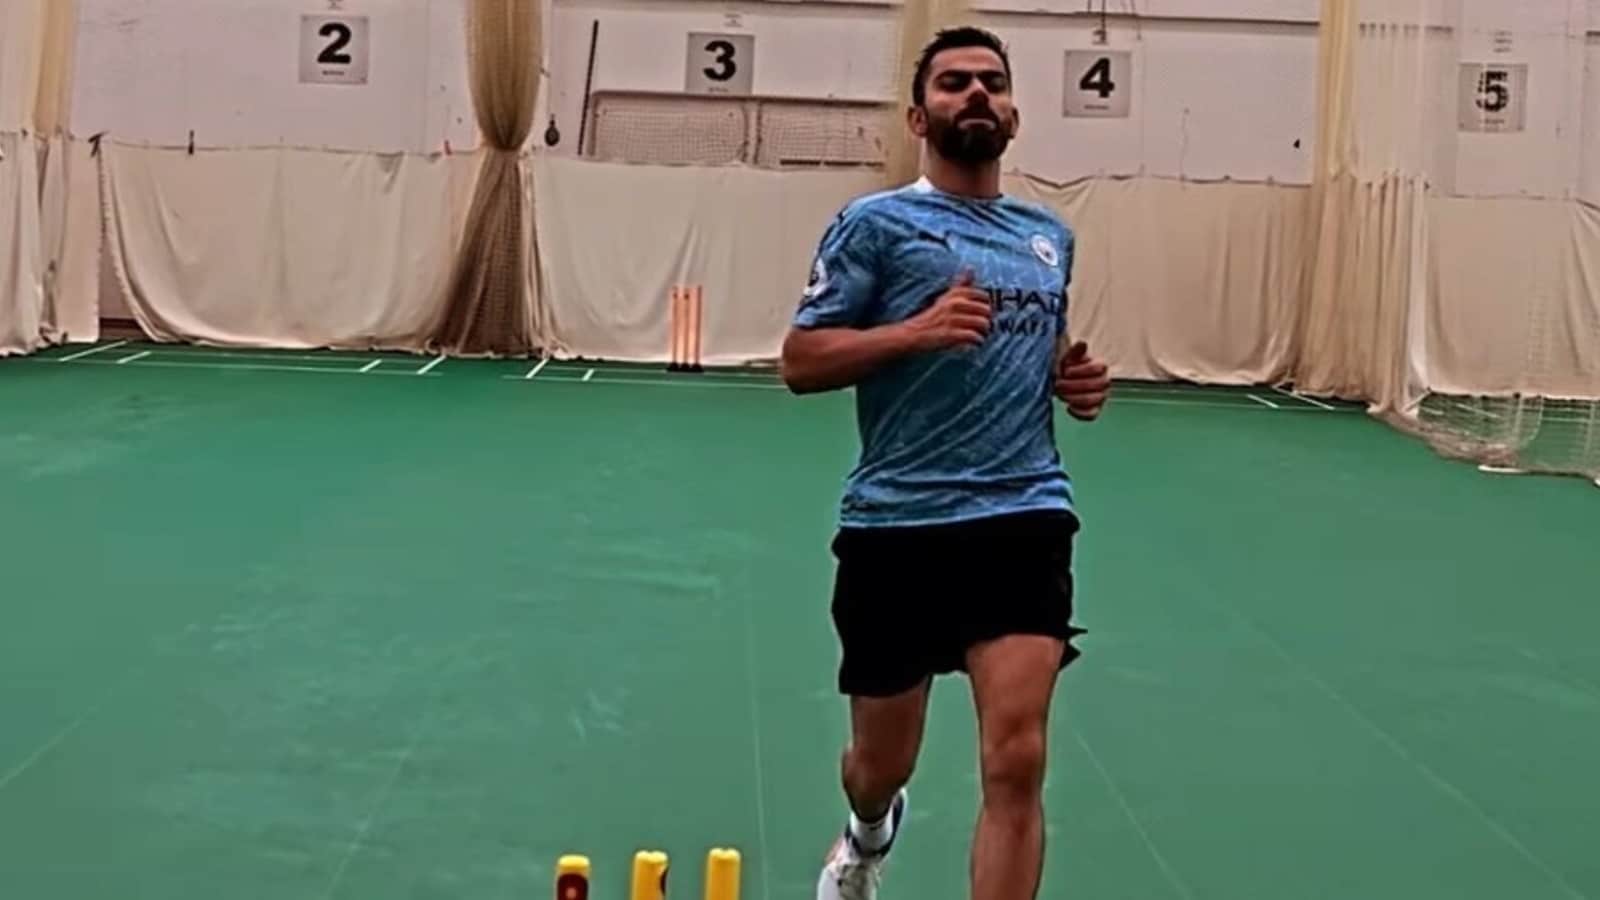 Watch: Virat Kohli gives insight into his training regime in viral video - Hindustan Times